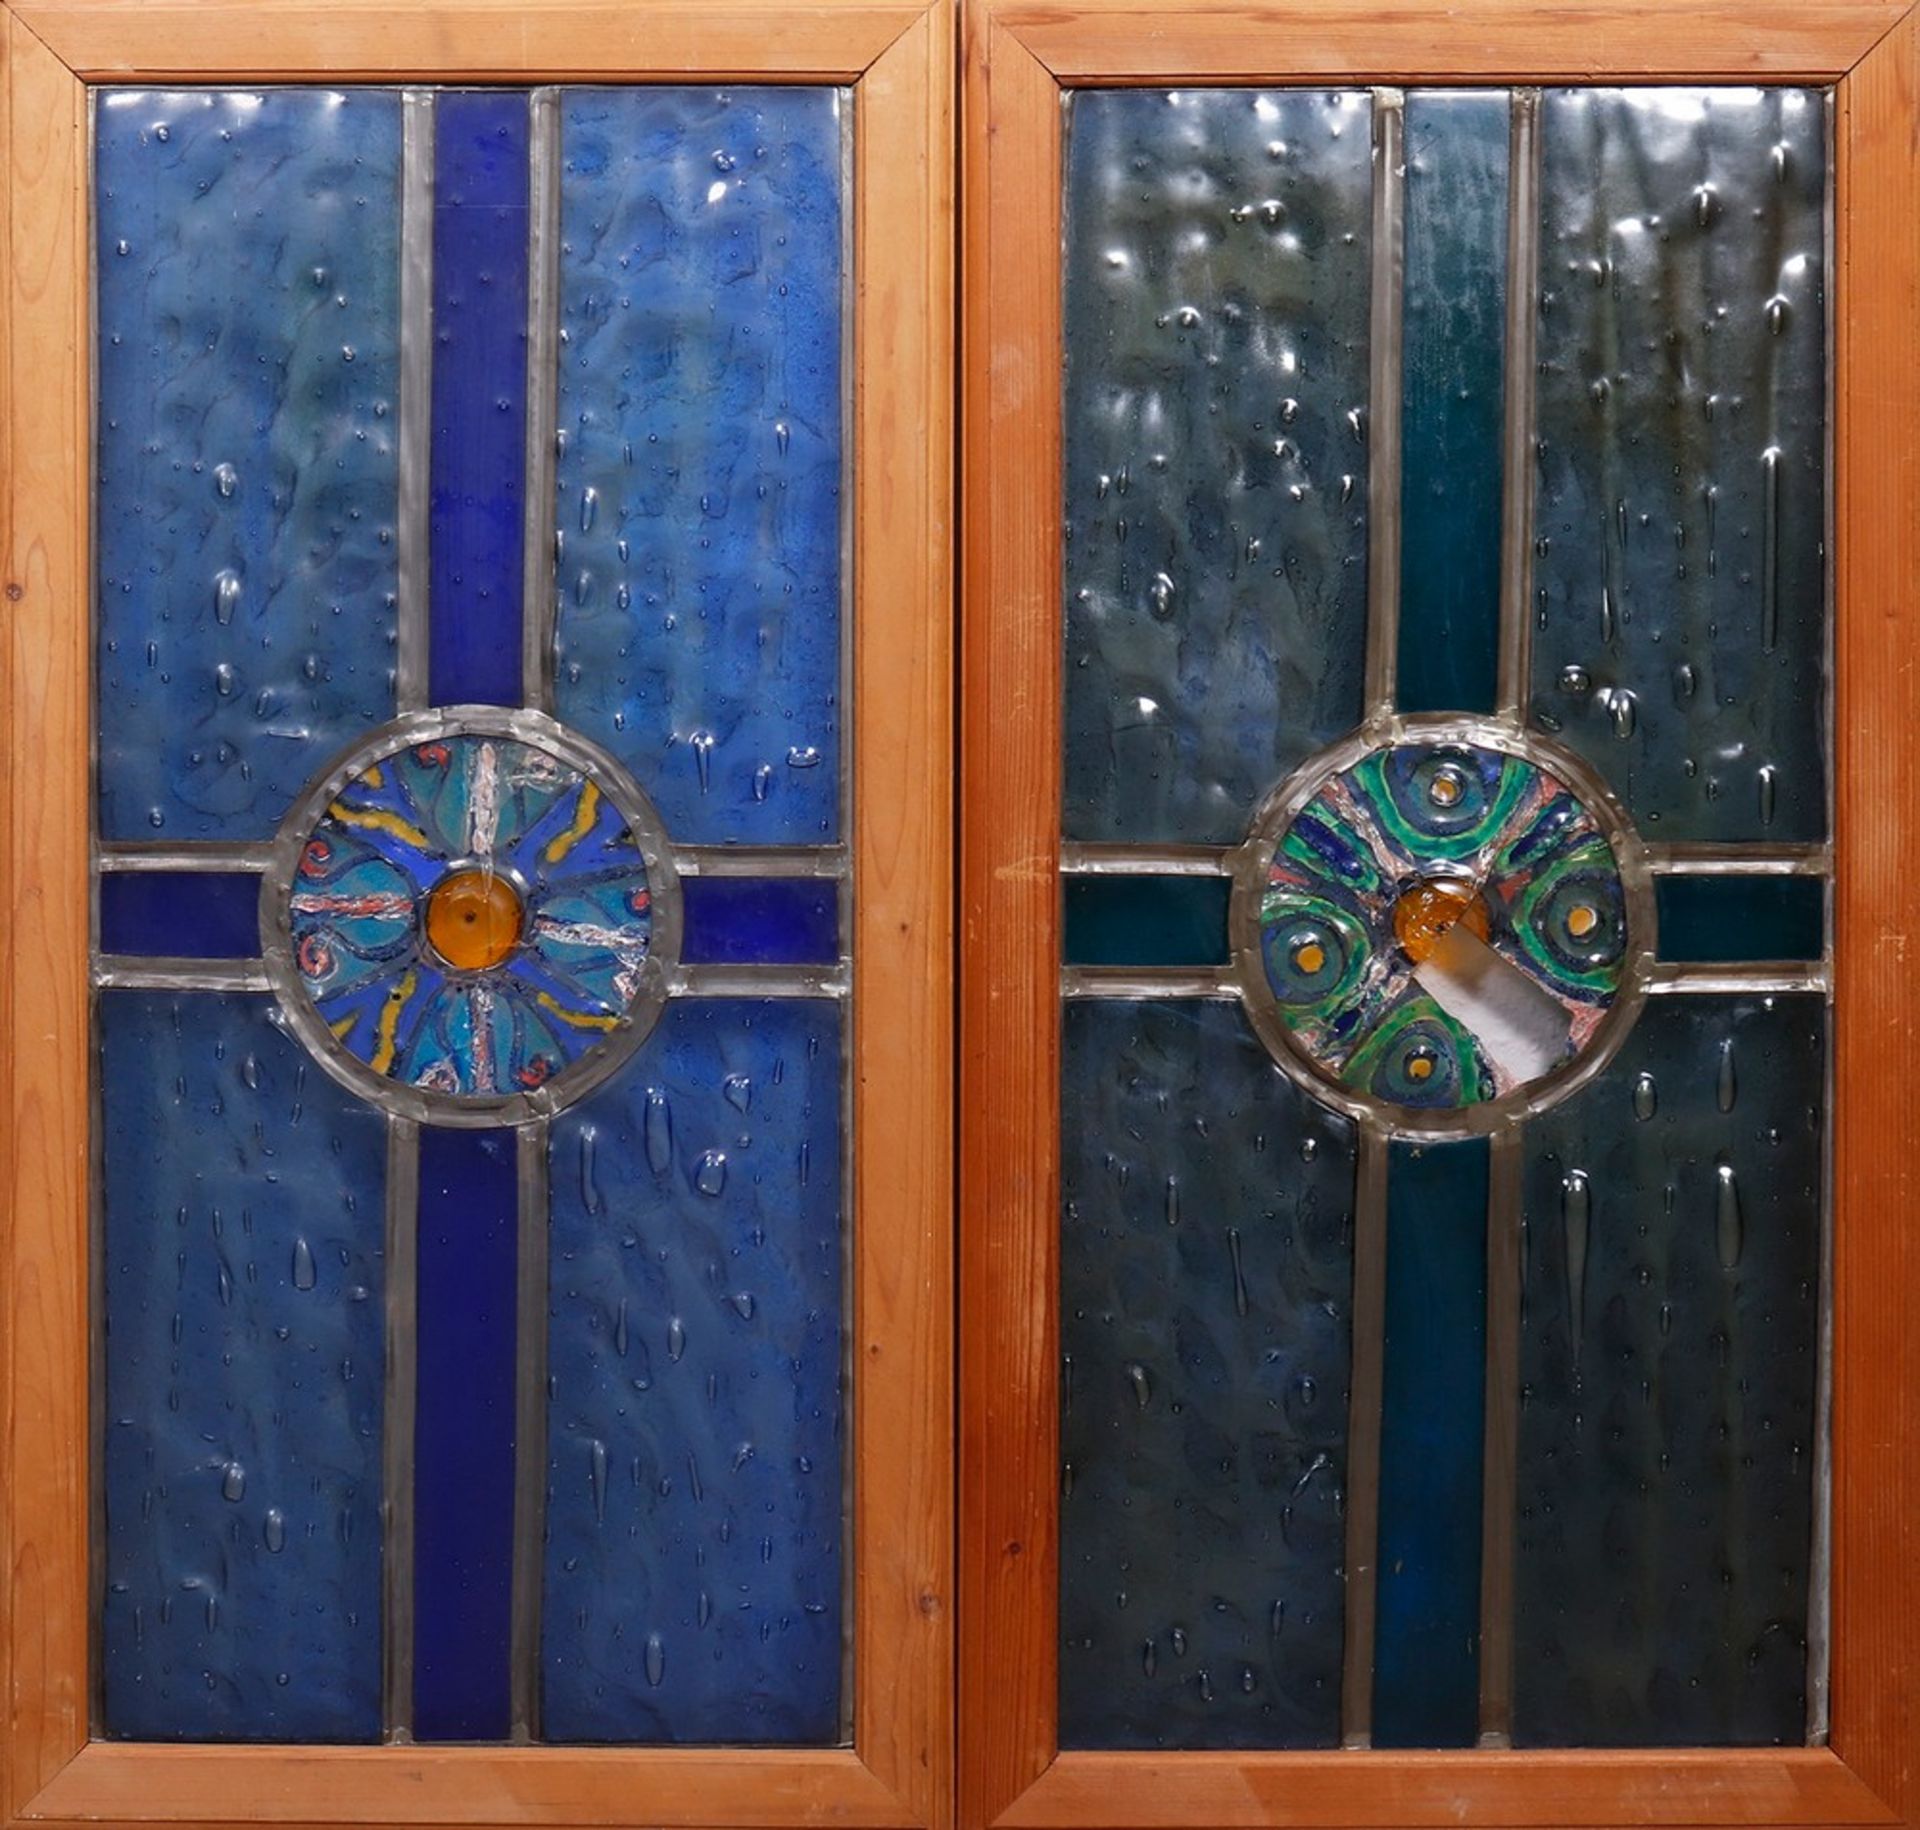 Pair of Art Deco stained glass windows, probably German, 1920s/30s - Image 2 of 4